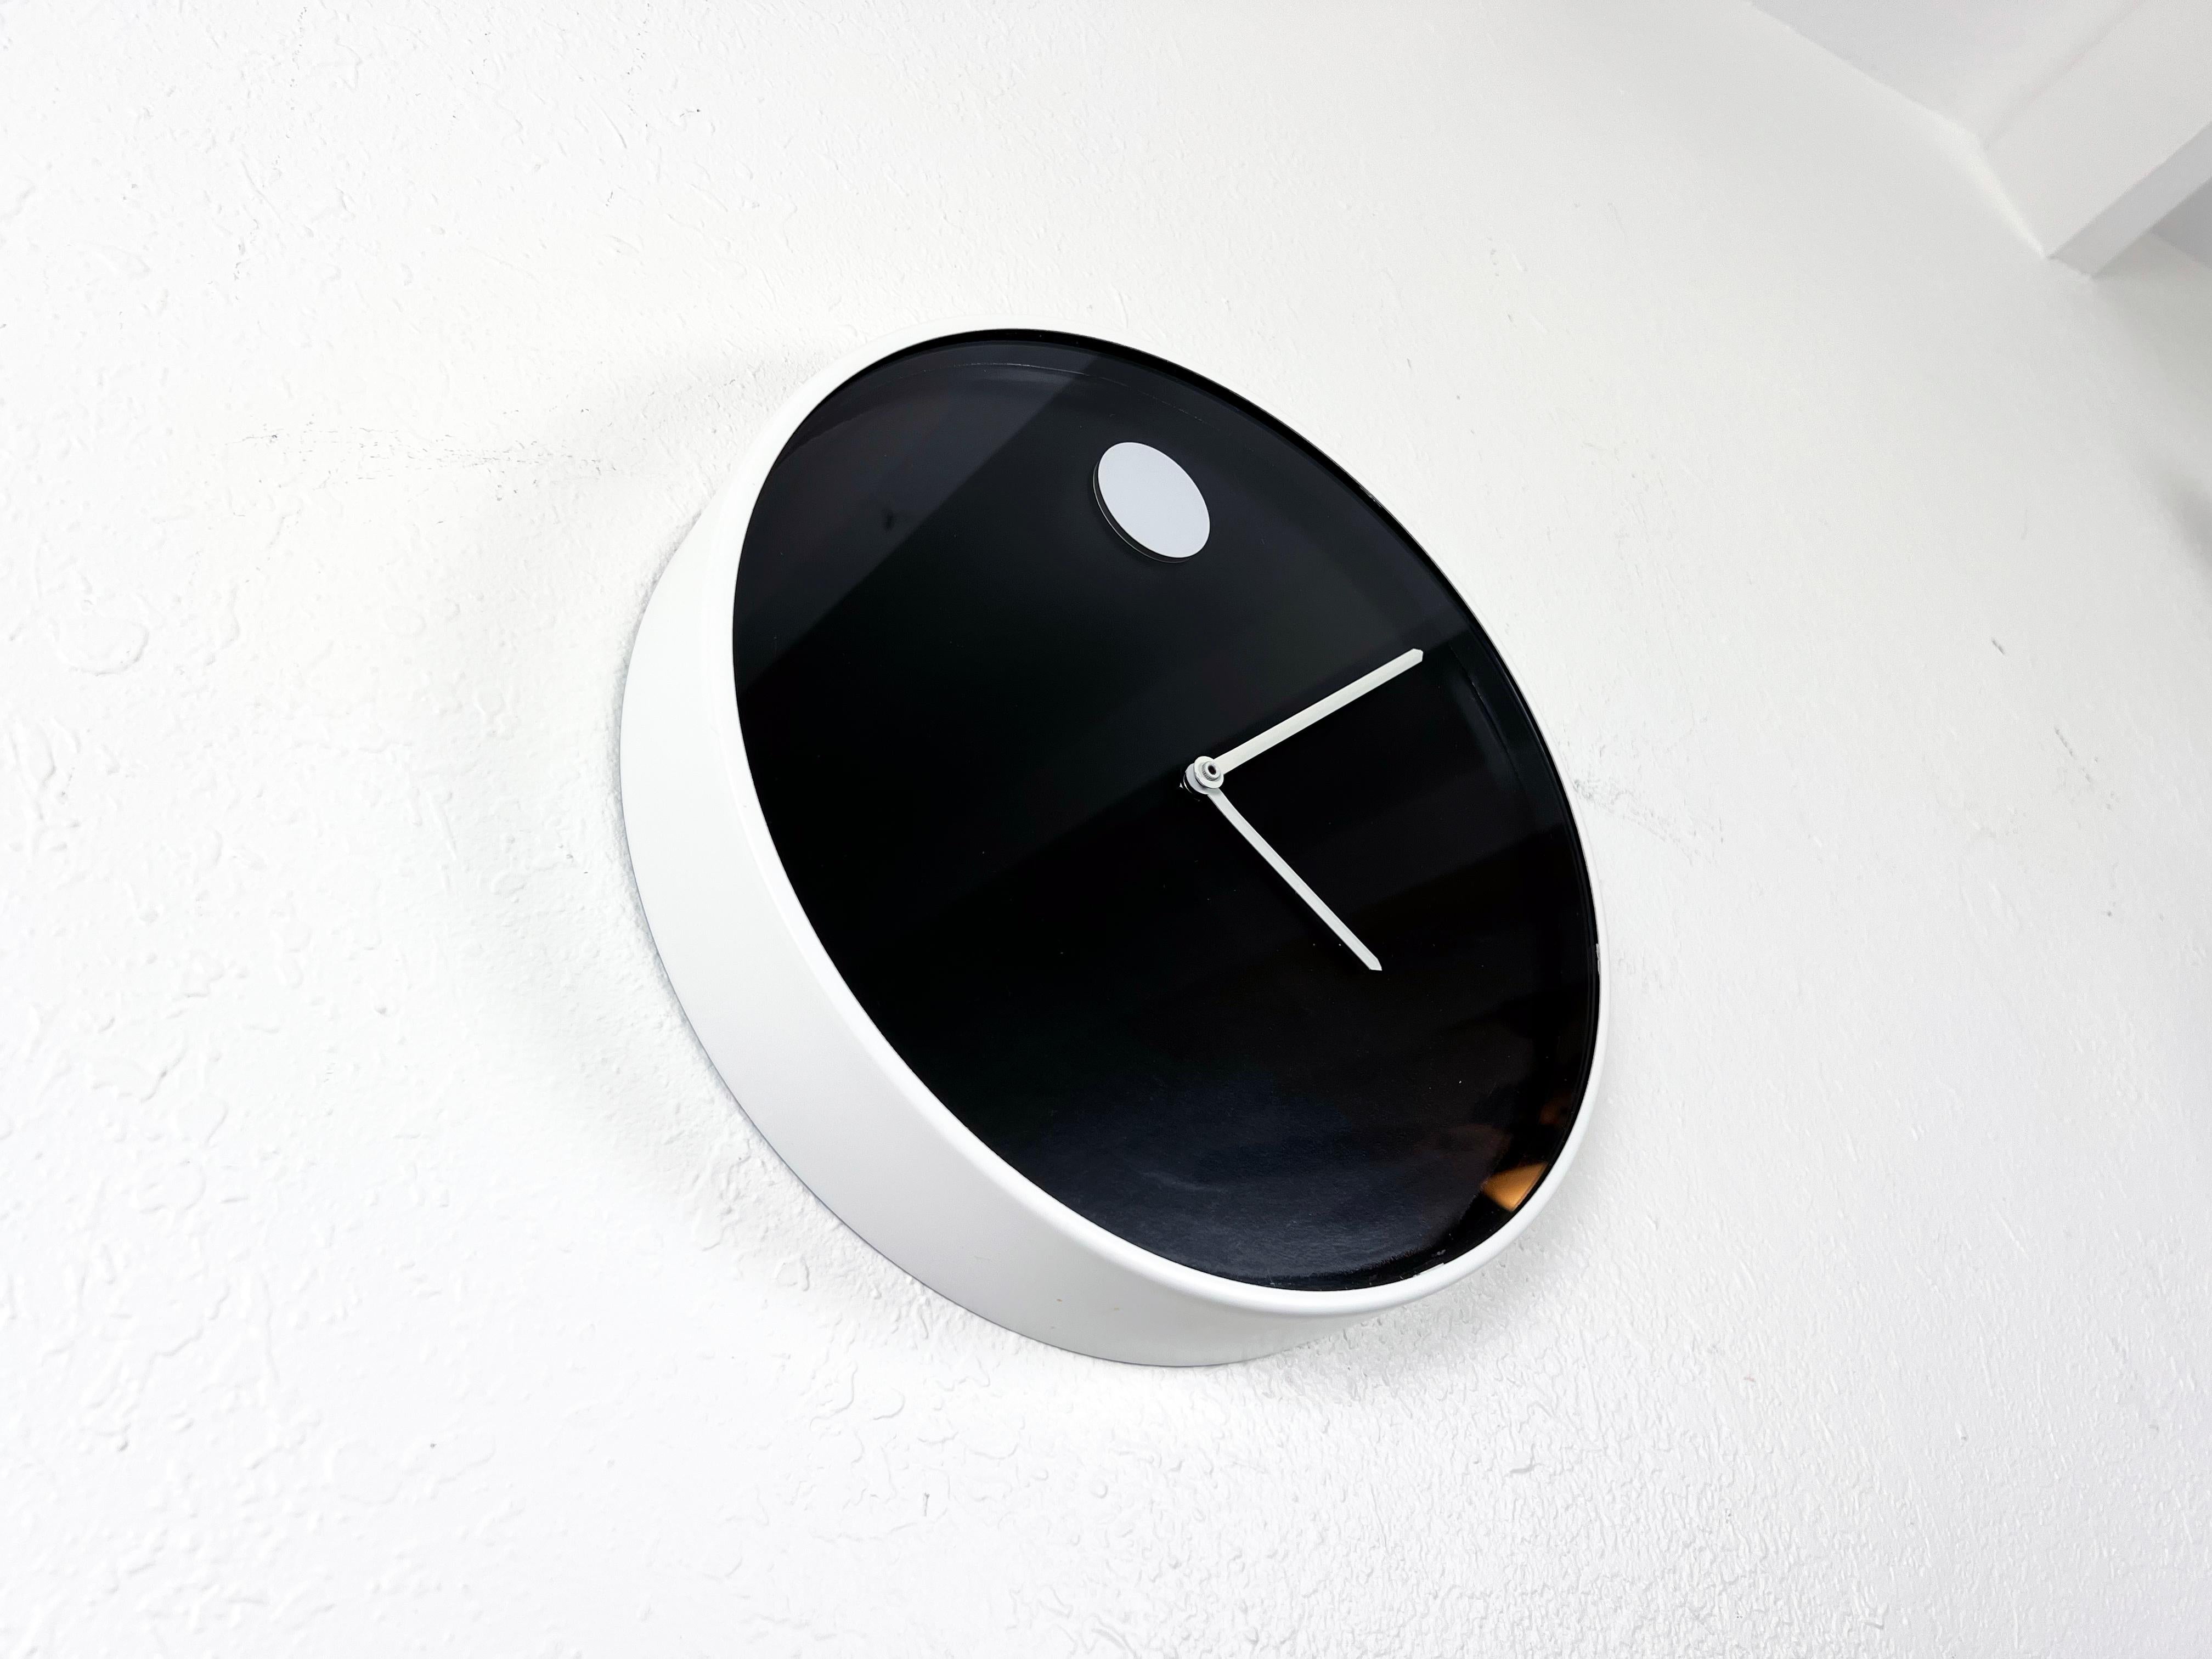 Vintage minimalist circular wall clock with white enameled metal case by Nathan George Horwitt for Howard Miller. Featured in the 1970's design collection of the Modern Museum of Art in New York City. 

Designer: Nathan George